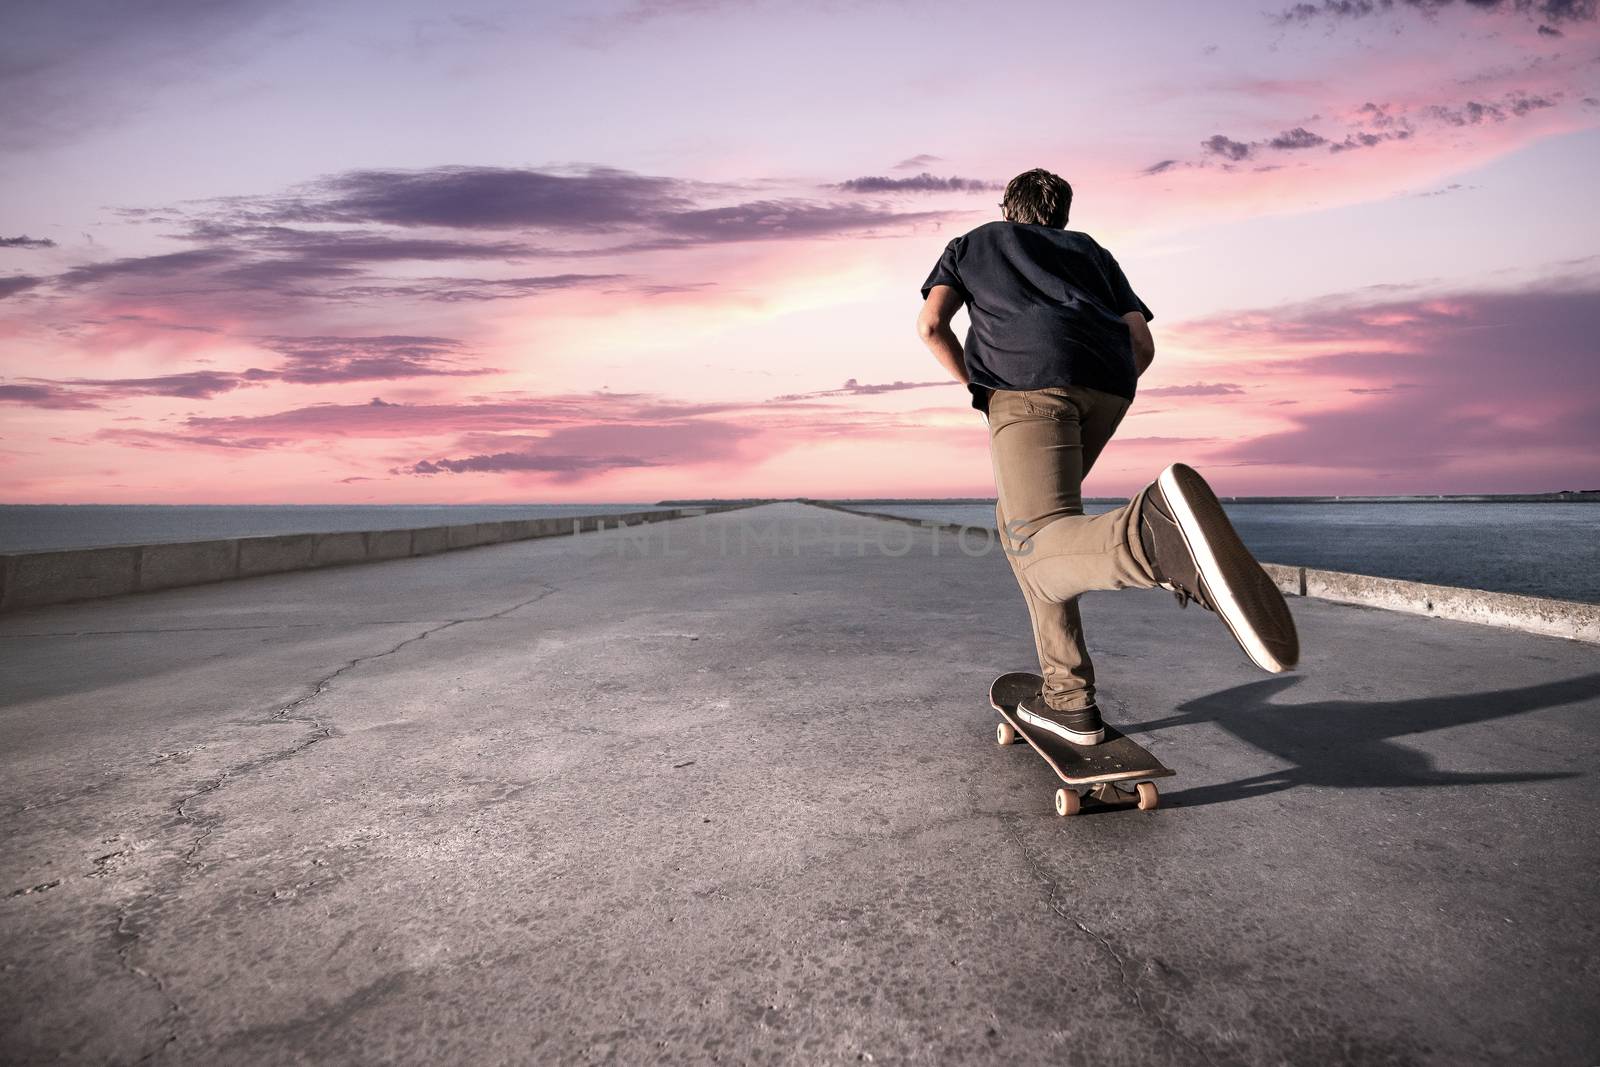 Skateboarder pushing on a concrete pavement by homydesign